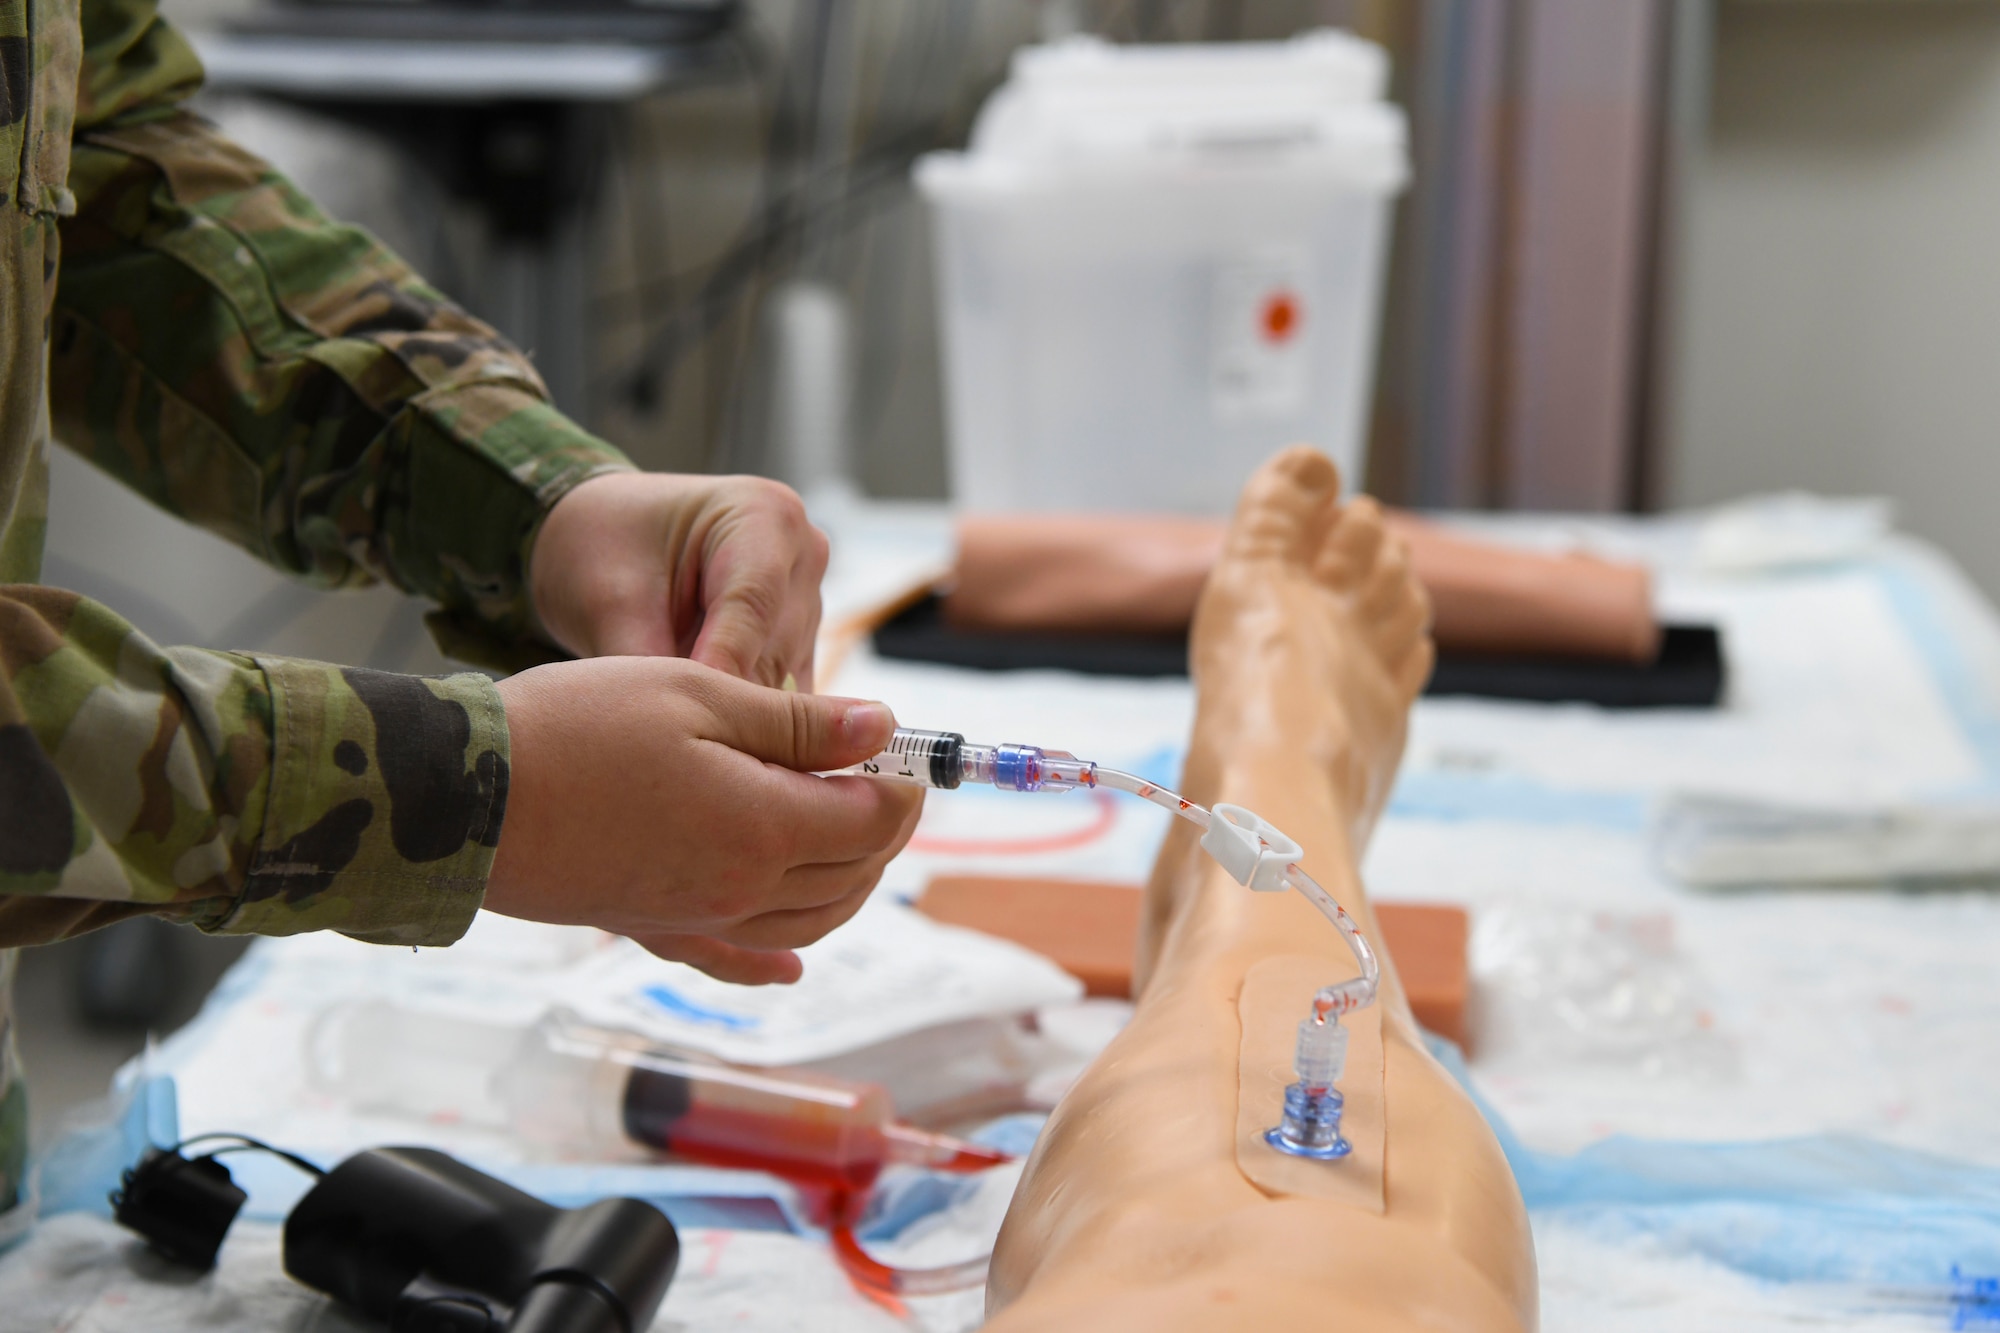 A U.S. Air Force Airman simulates a fluid infusion with an inner bone catheter in a training mannequin’s leg